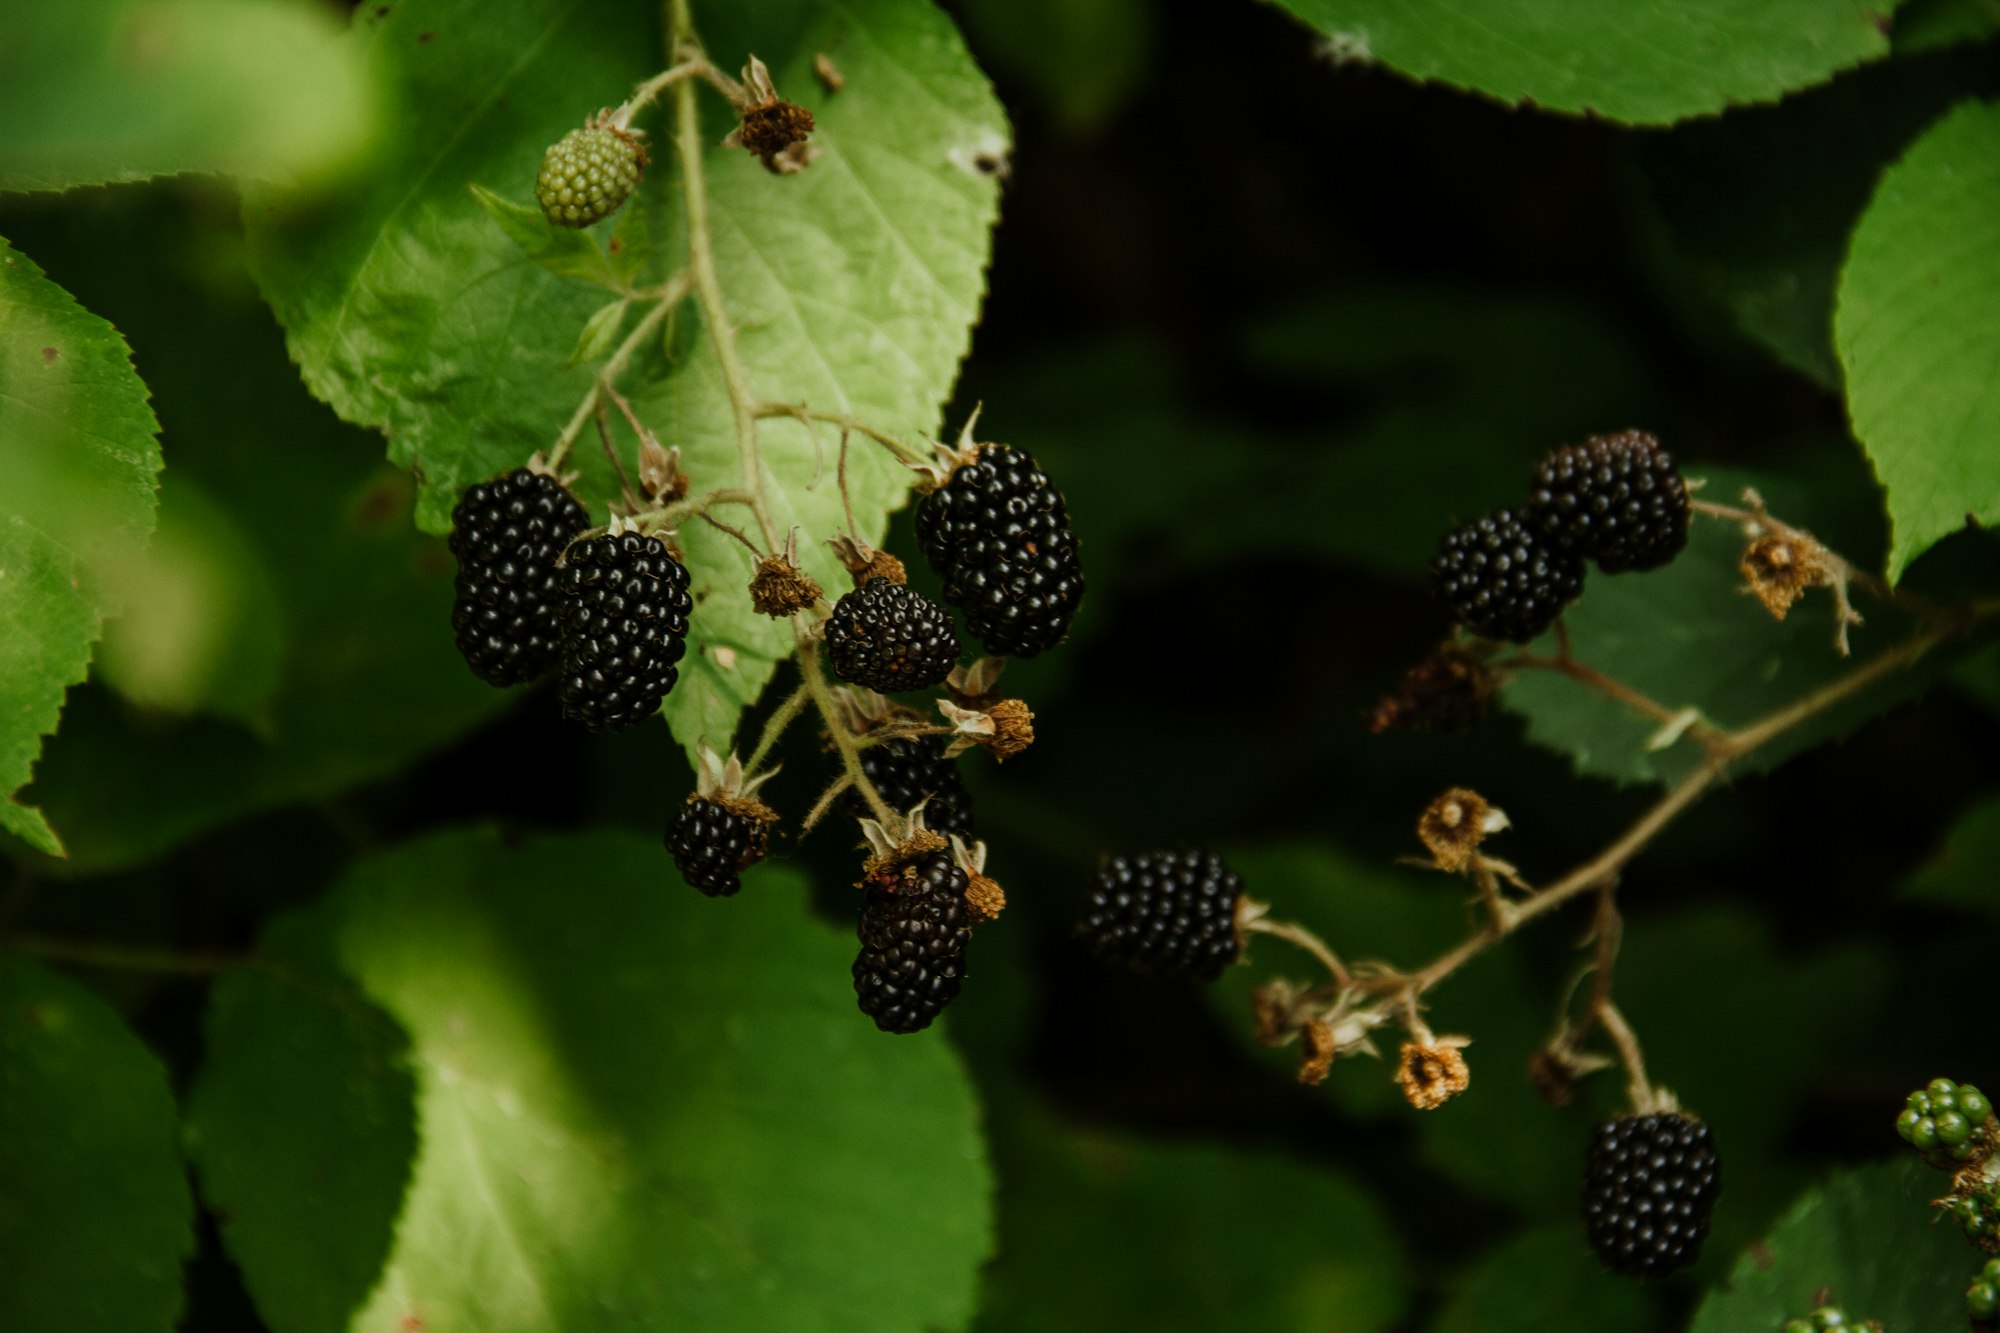 blackberry plant with fruits as nice natural background